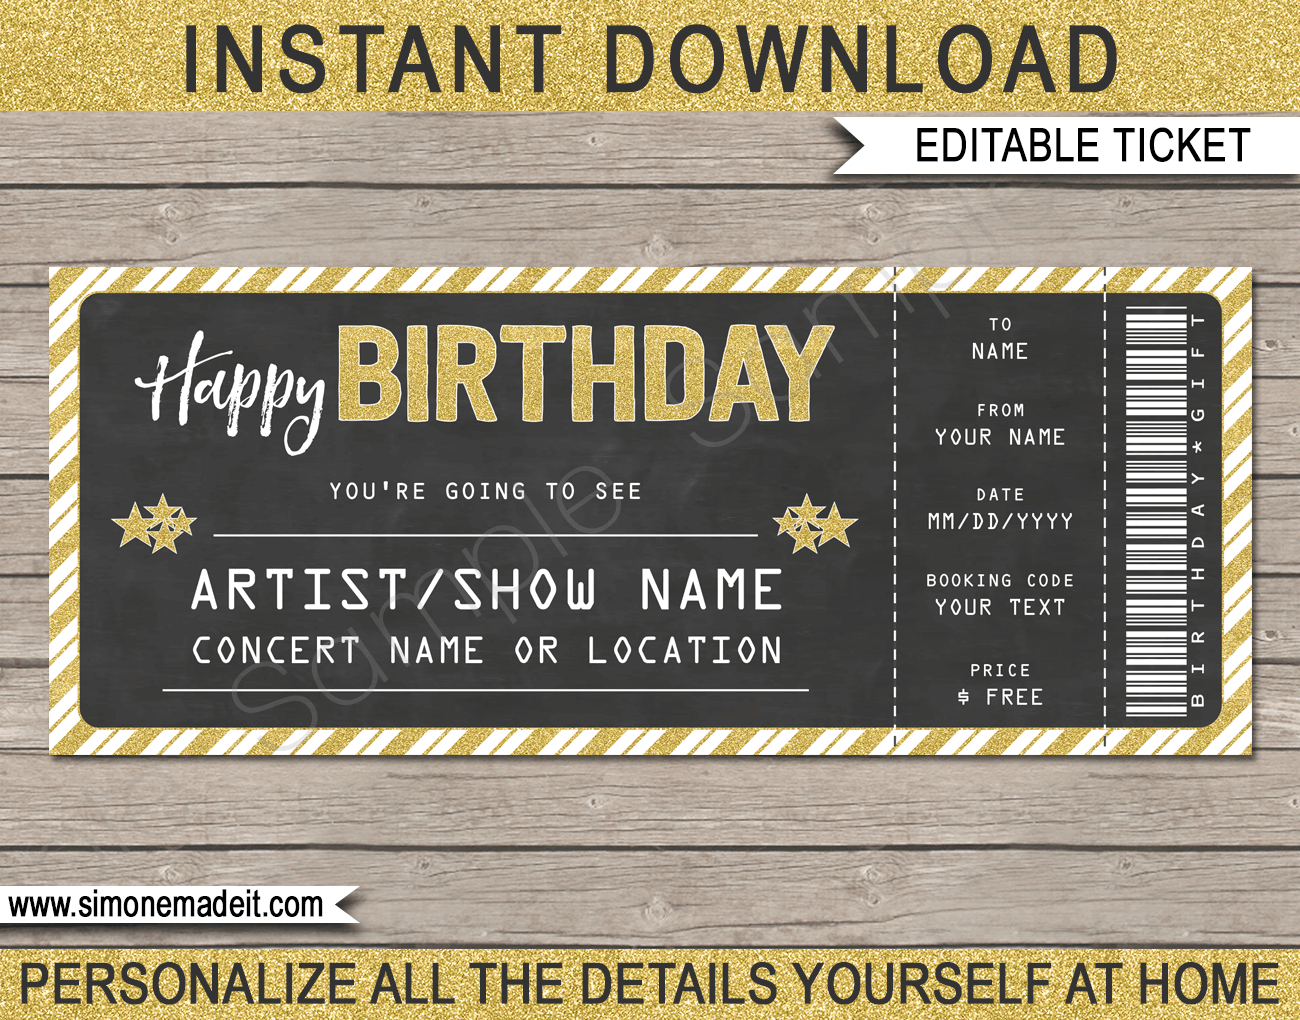 Printable Concert Ticket Template | Birthday Gift Voucher Throughout Golf Gift Certificate Template